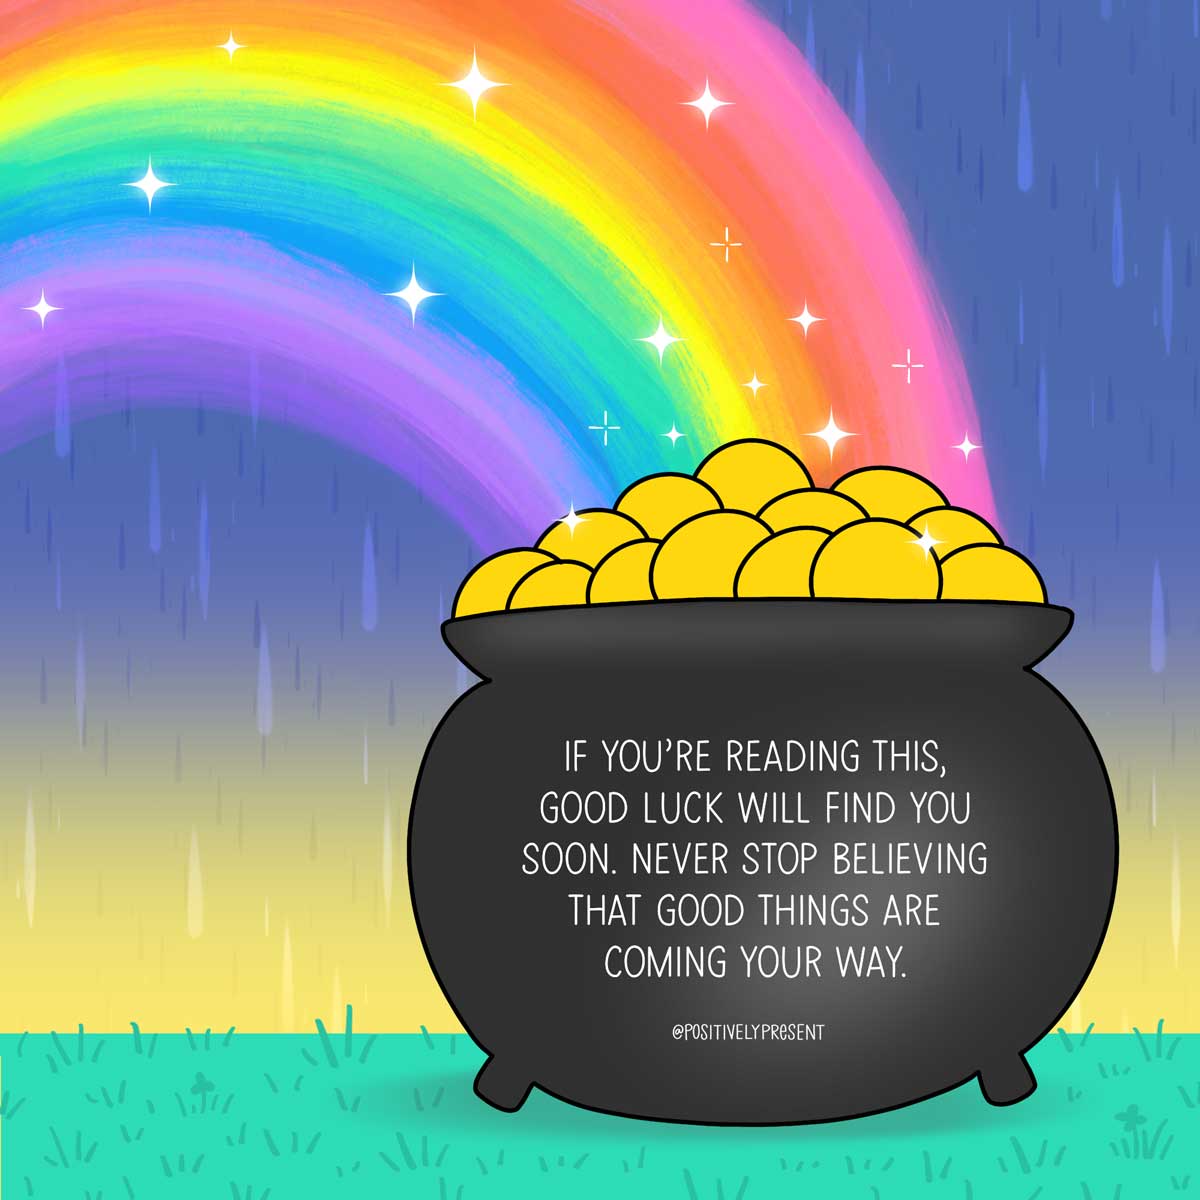 rainbow and pot of gold says good luck will find you.